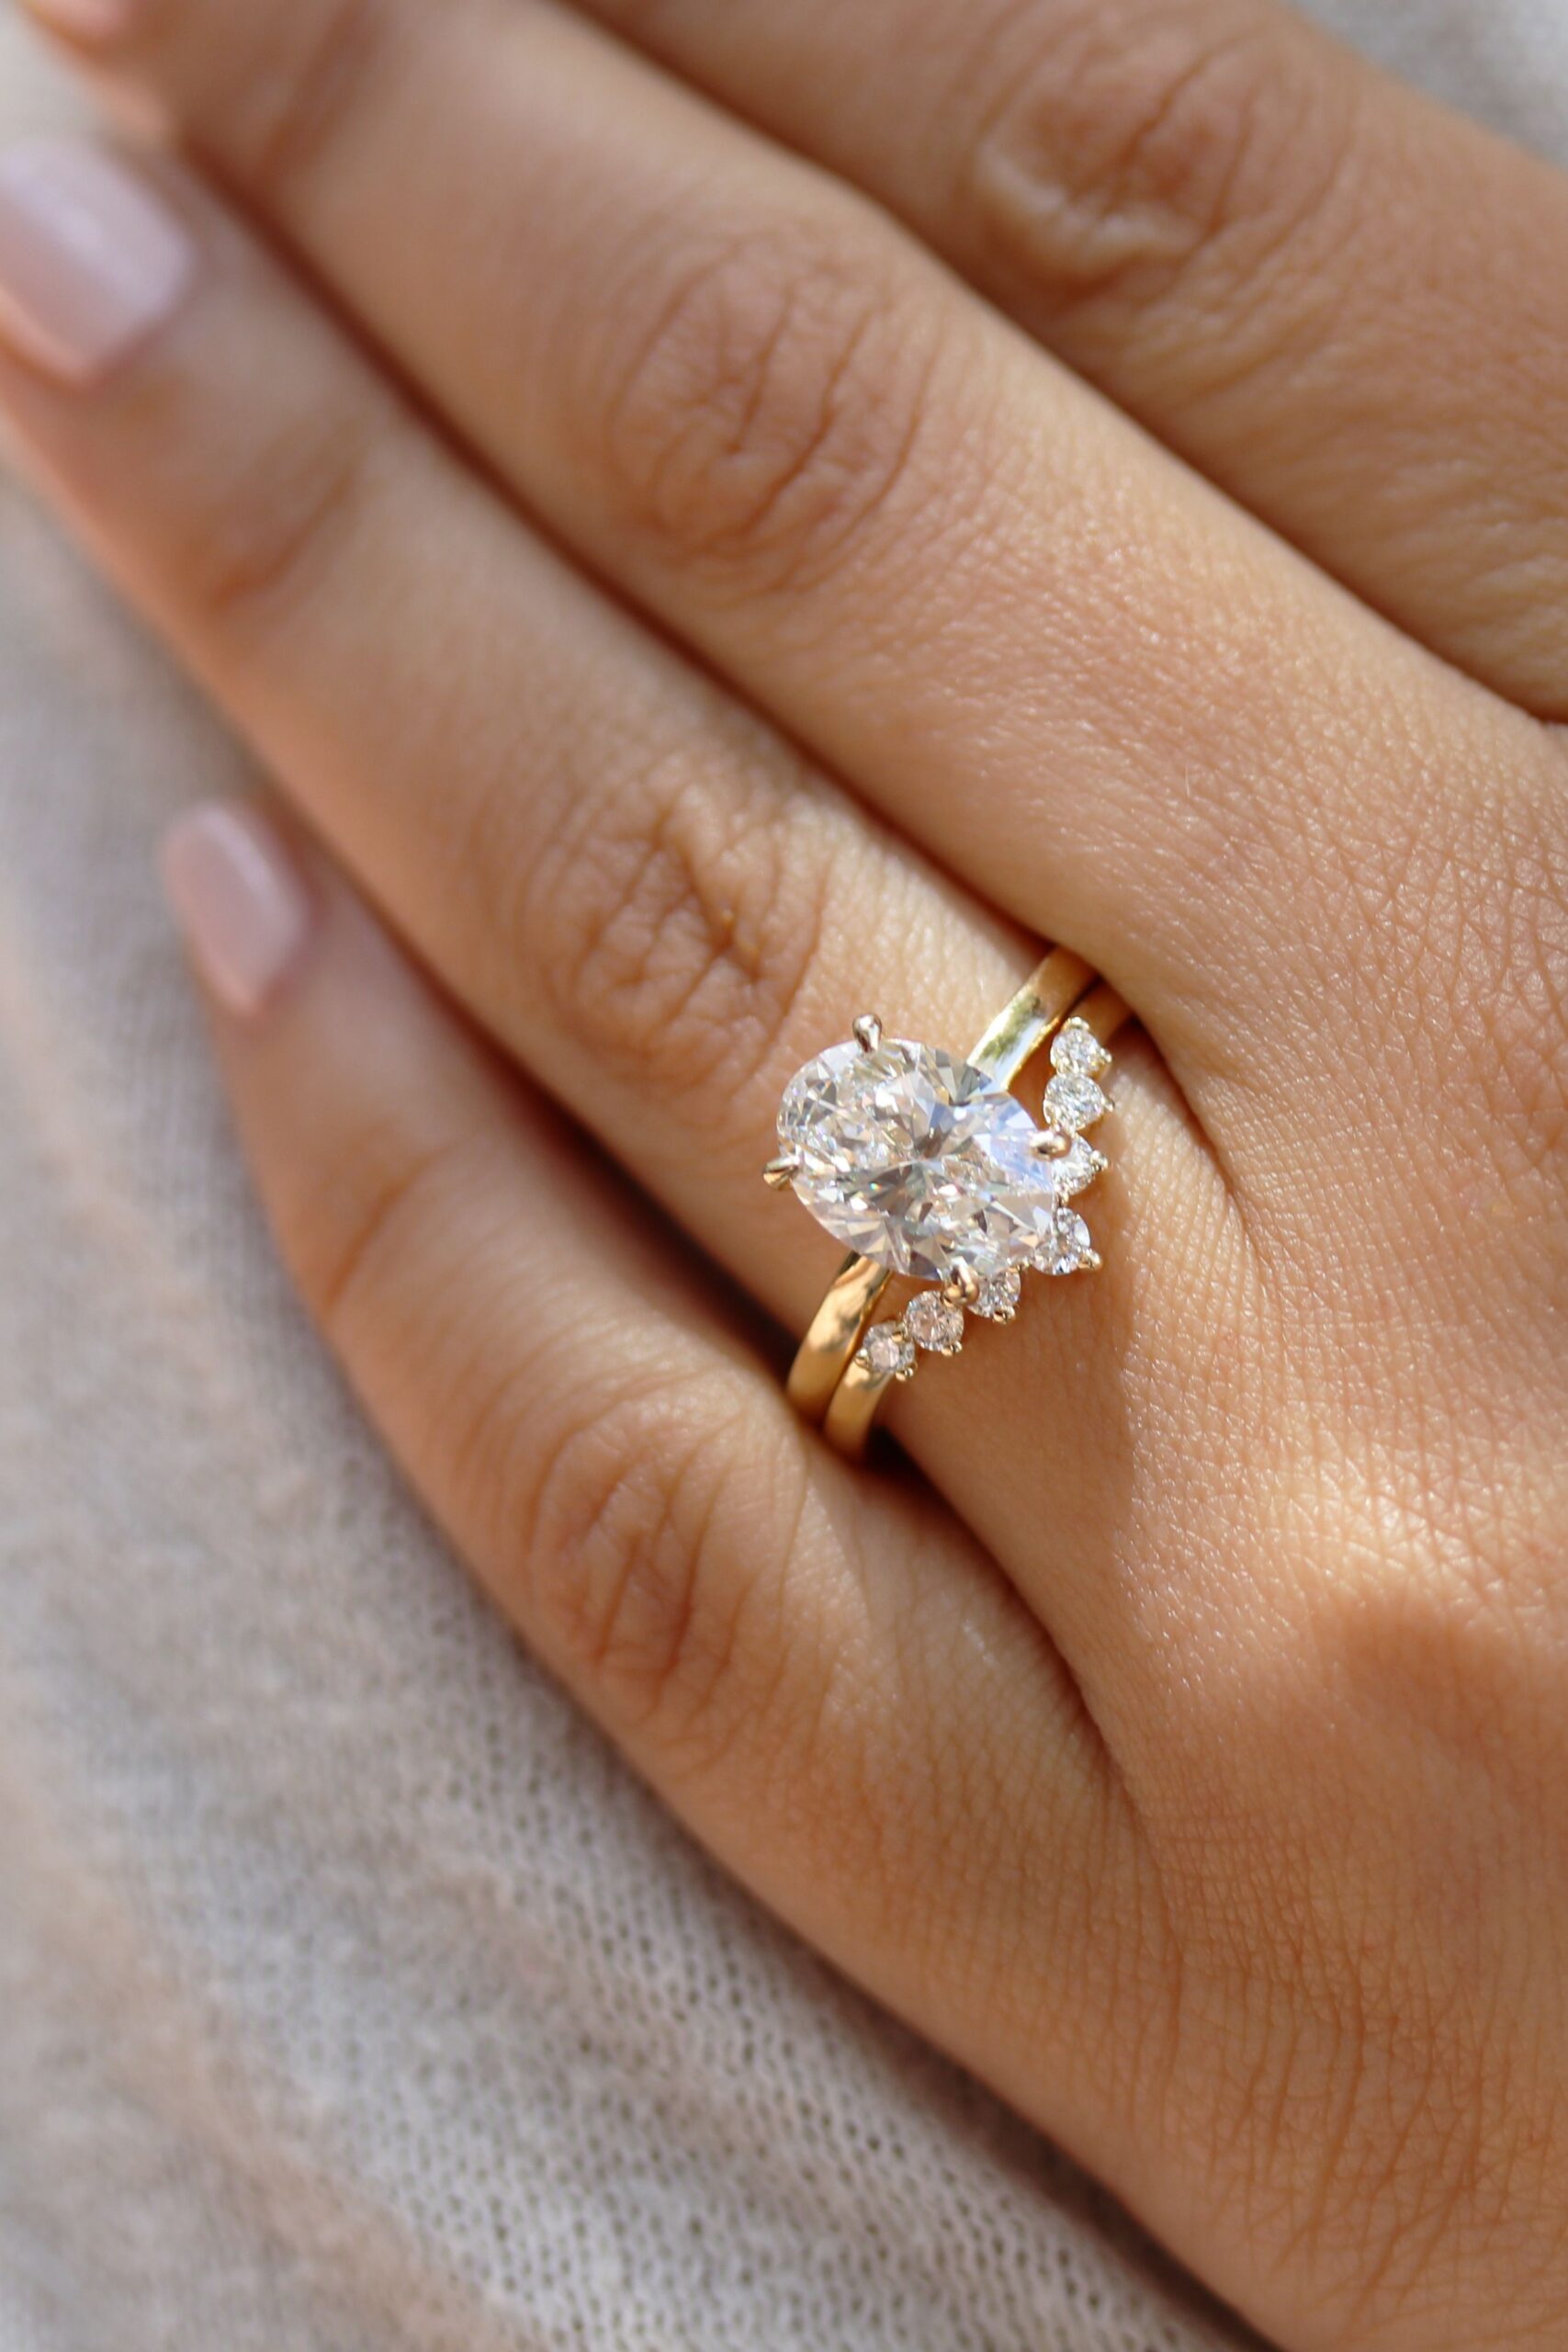 12 Types of Rings Everyone Should Know